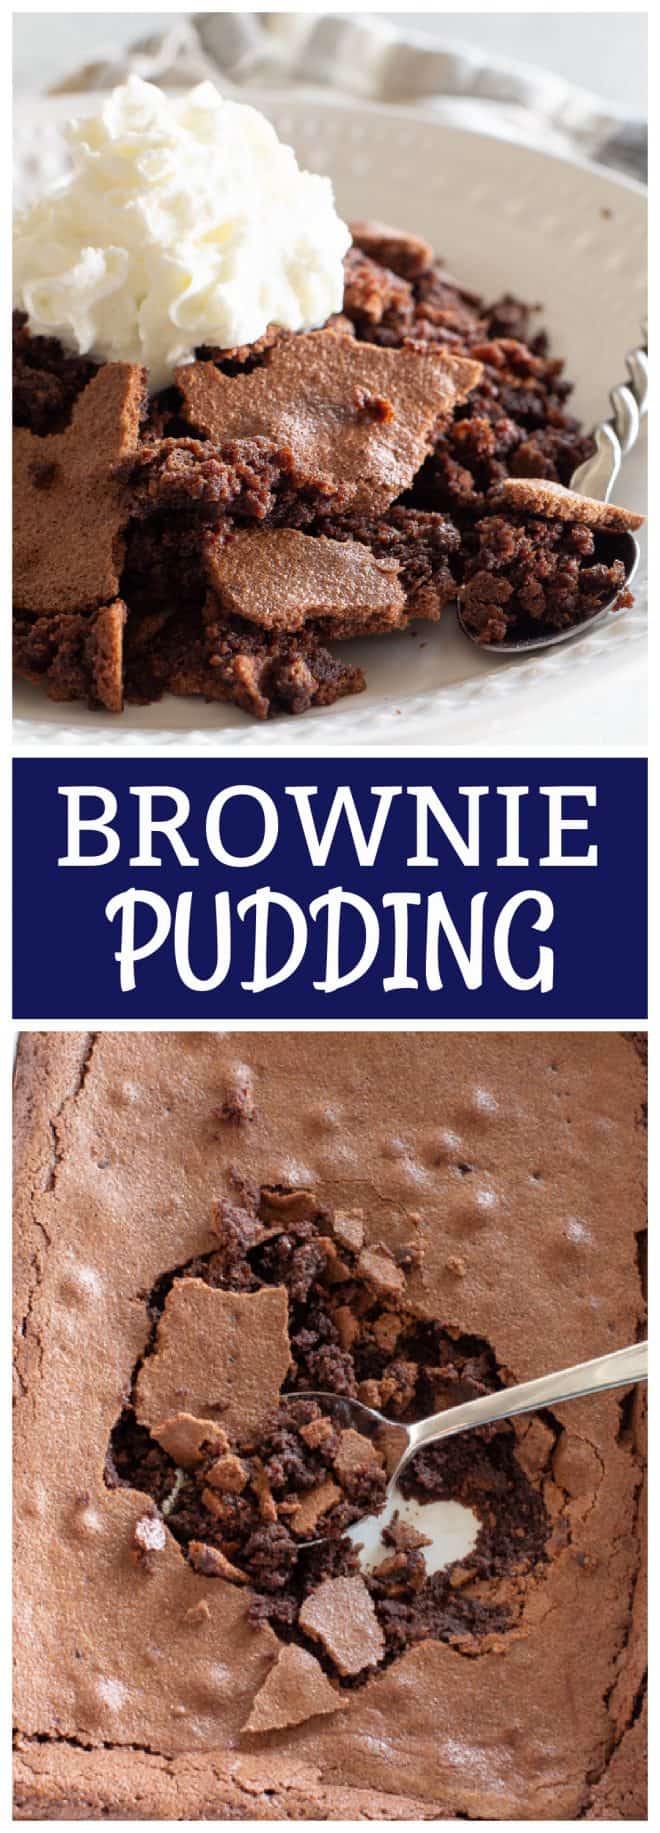 brownie pudding